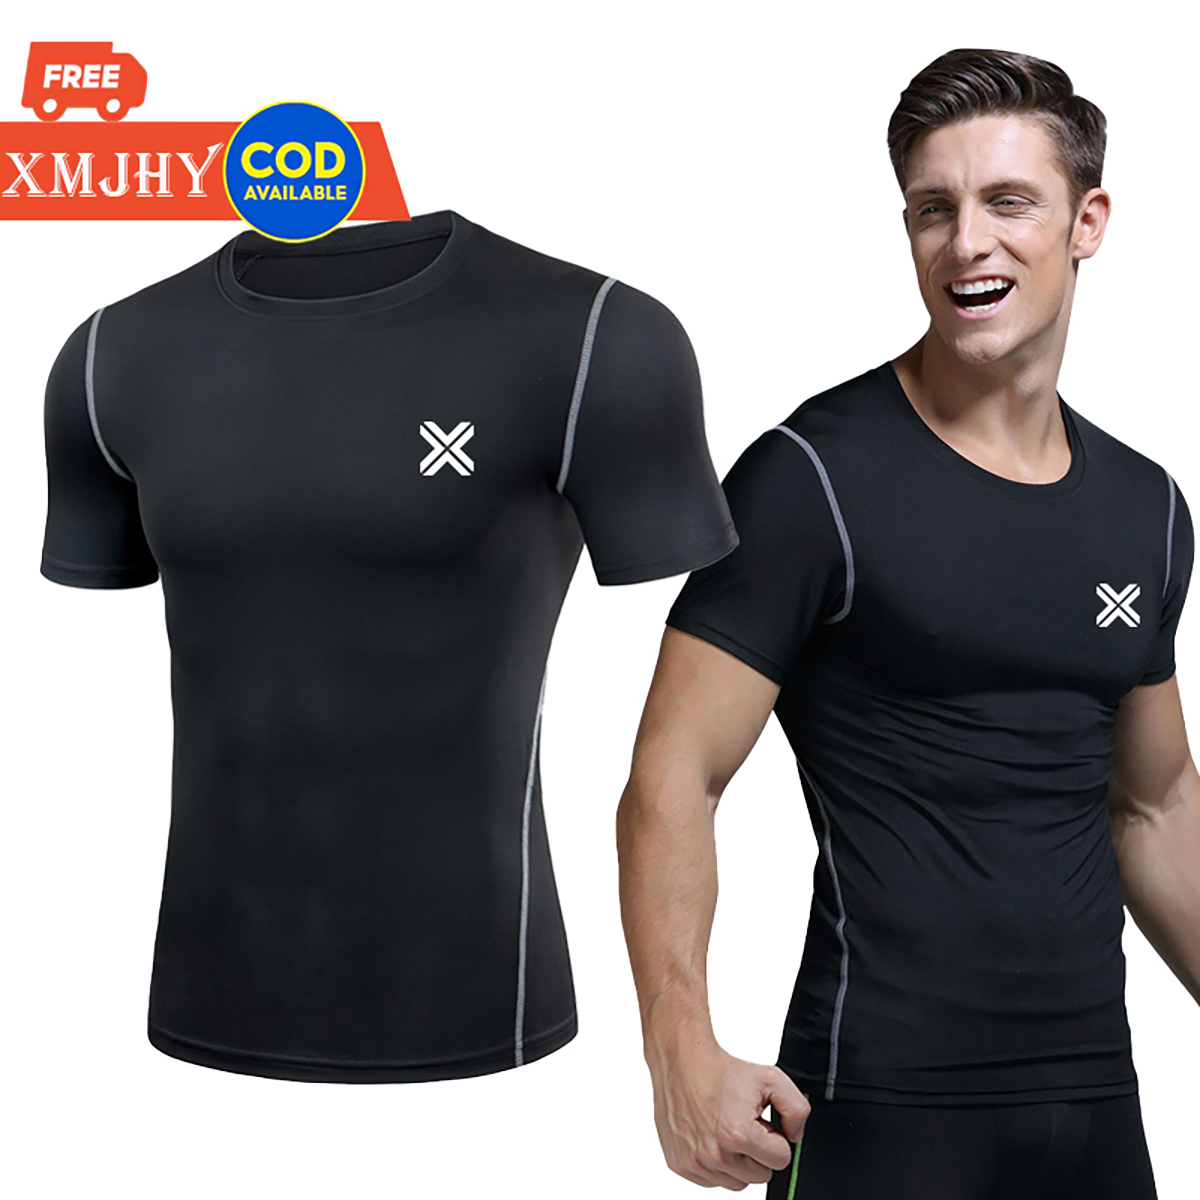 ACTIVE-DRY AERO DRY T-Shirt for Men Sportswear Fitness Tight Dri Fit Quick  Dry for Gym Training Running Basketball Football